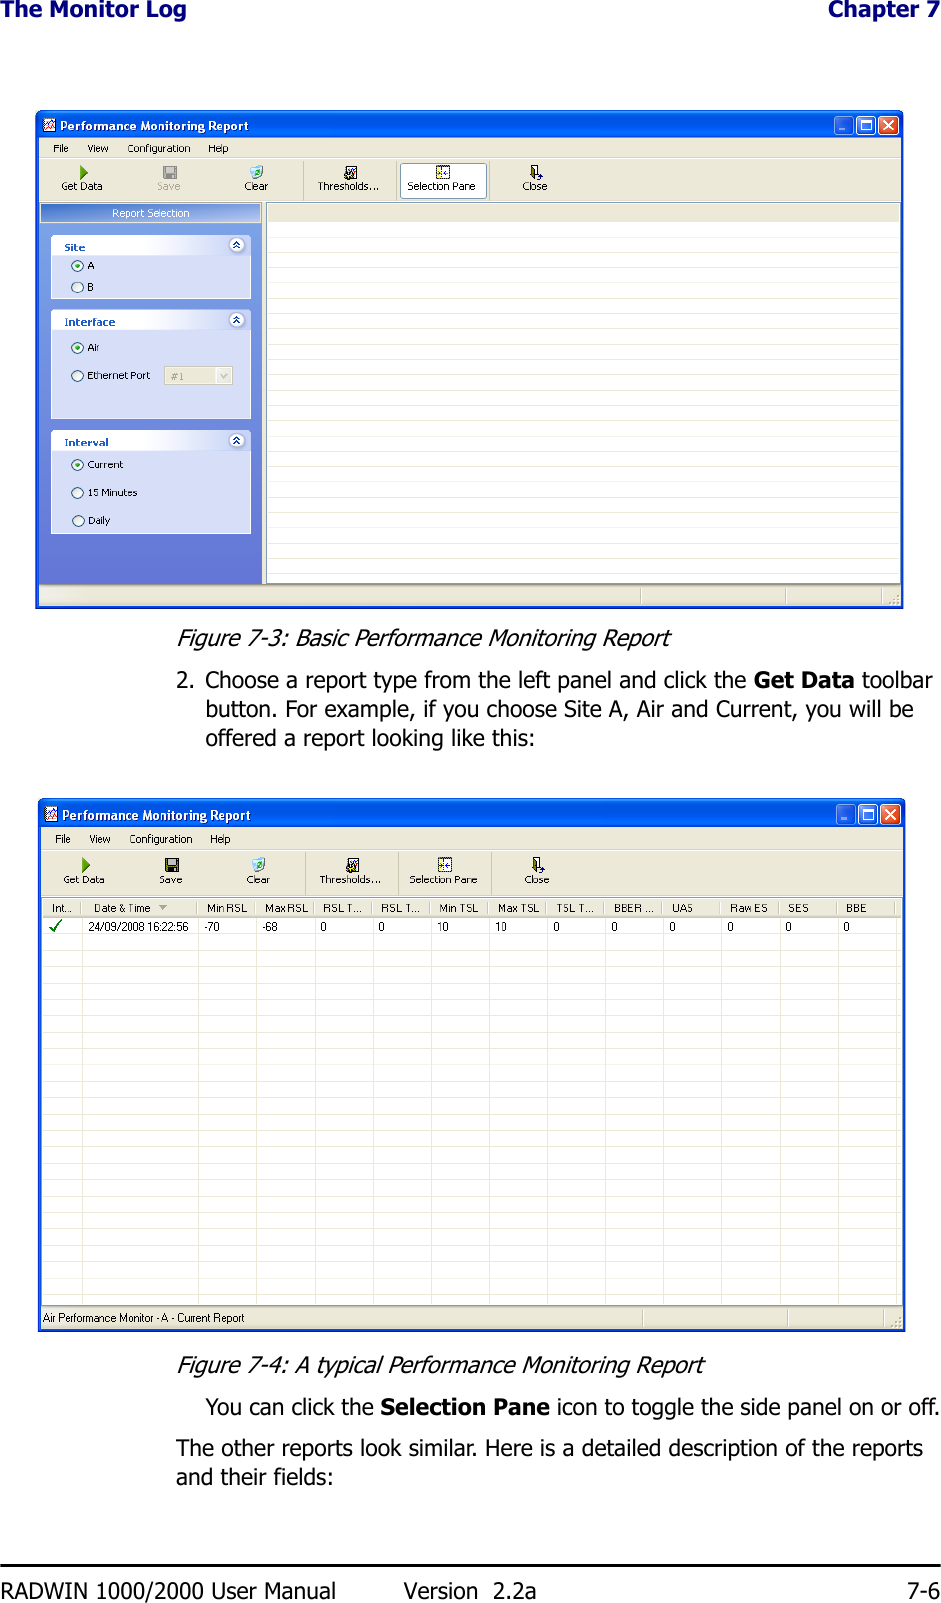 The Monitor Log  Chapter 7RADWIN 1000/2000 User Manual Version  2.2a 7-6Figure 7-3: Basic Performance Monitoring Report2. Choose a report type from the left panel and click the Get Data toolbar button. For example, if you choose Site A, Air and Current, you will be offered a report looking like this:Figure 7-4: A typical Performance Monitoring ReportYou can click the Selection Pane icon to toggle the side panel on or off.The other reports look similar. Here is a detailed description of the reports and their fields: